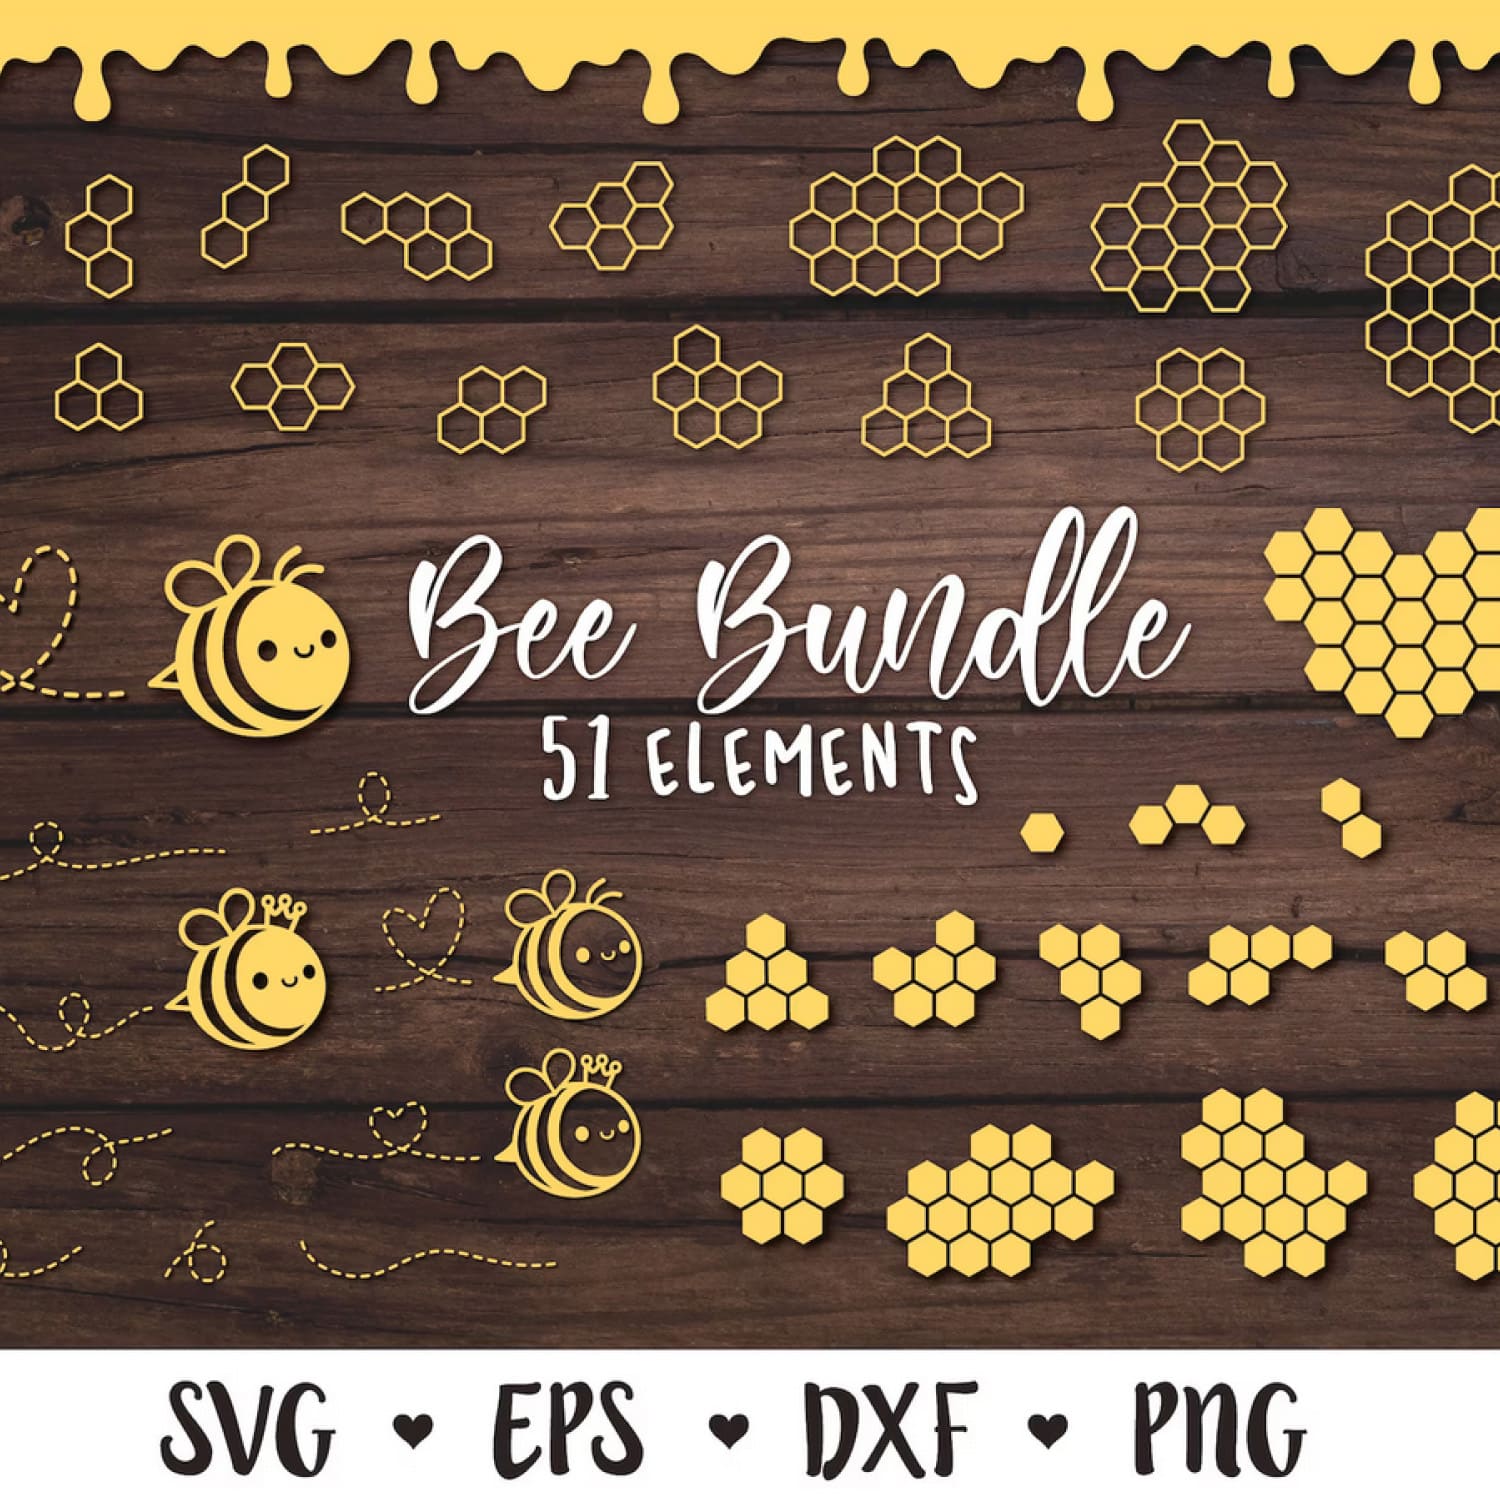 Bee SVG Bundle Honeycomb main cover.